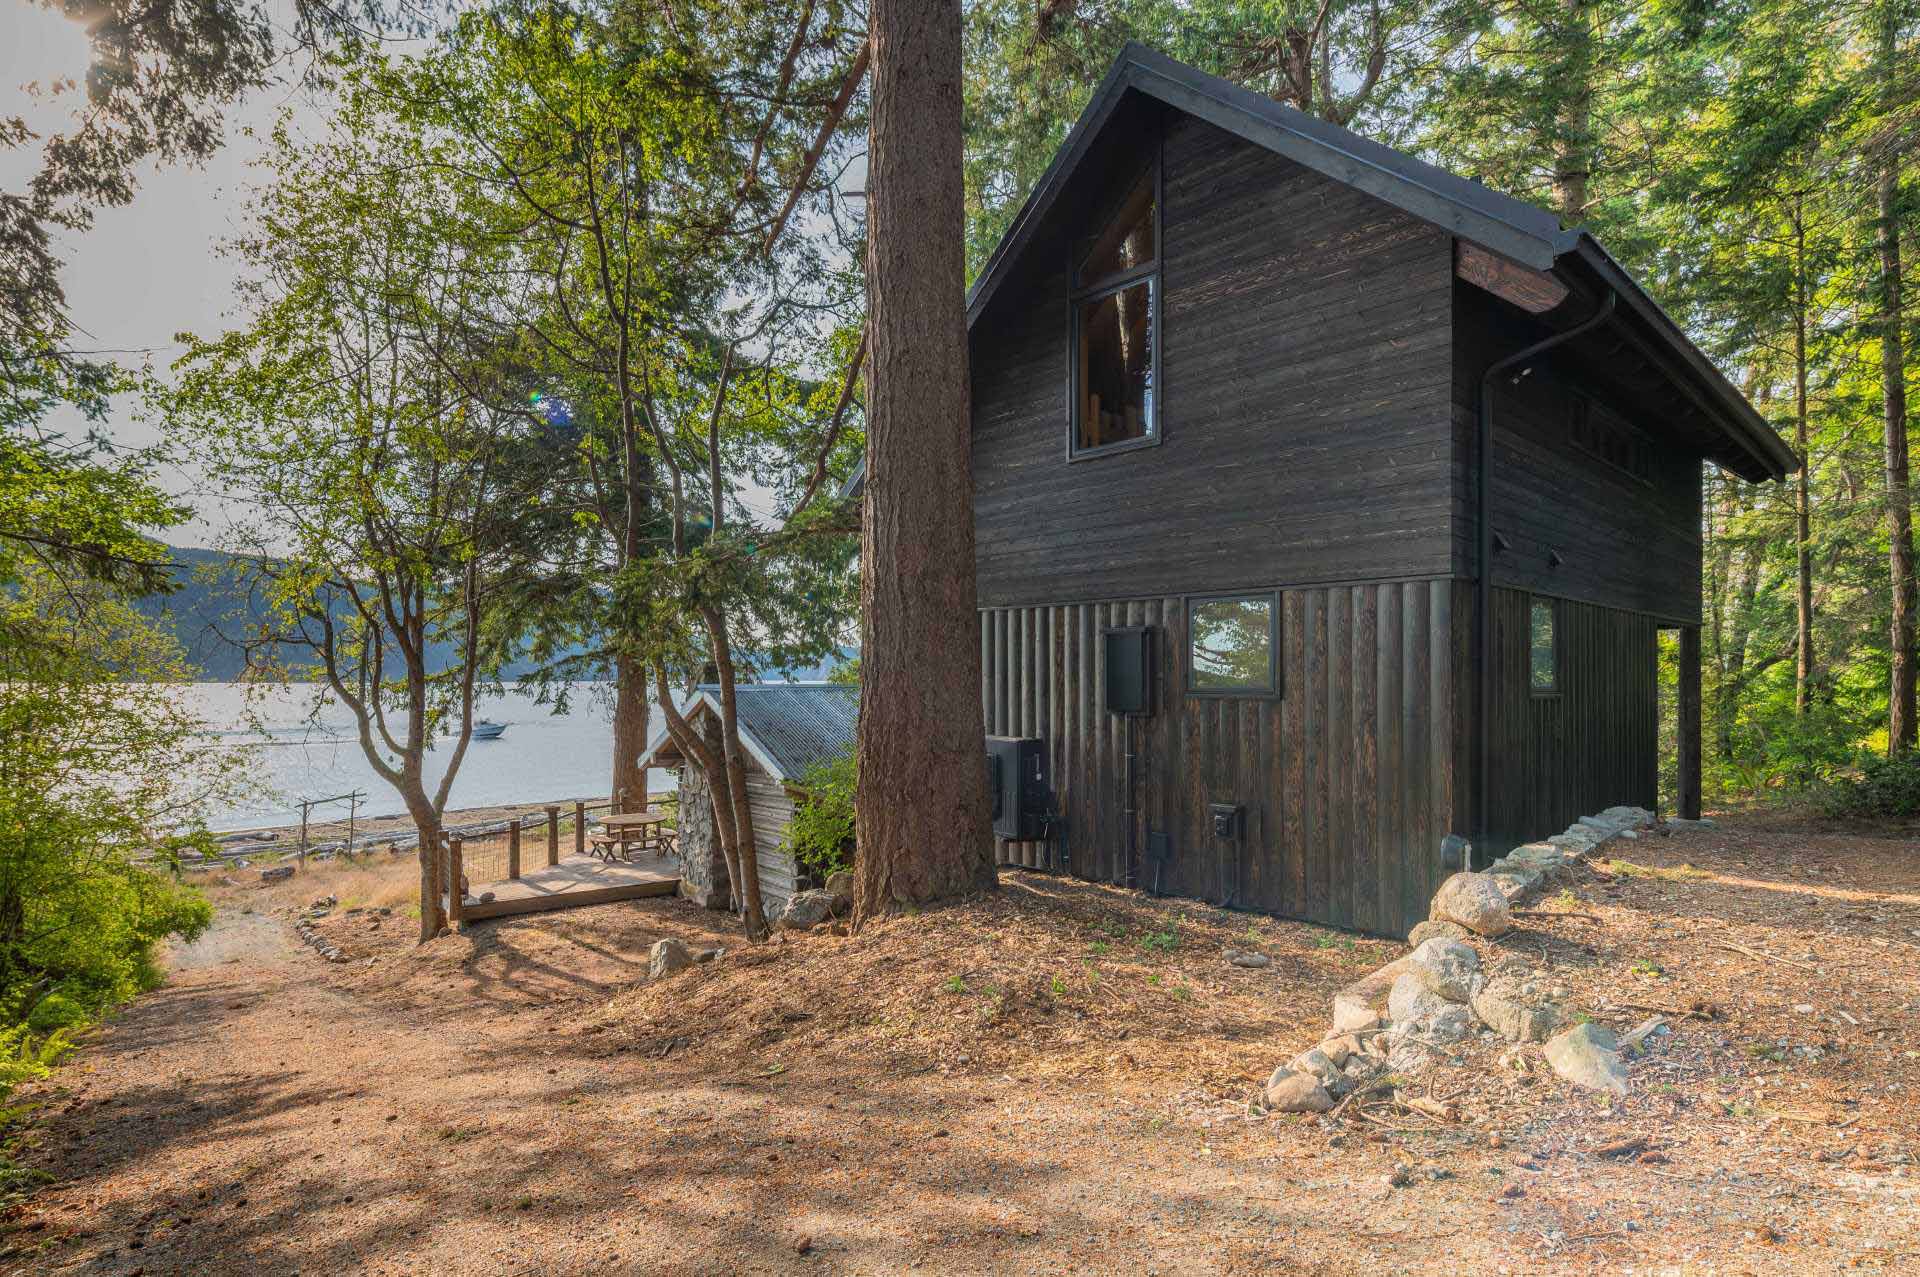 The exterior of the cabin features tongue and groove rough-sawn Western Red Cedar cladding, while the lower section has Disdero Cabin Log Siding. Both of which have been stained black.